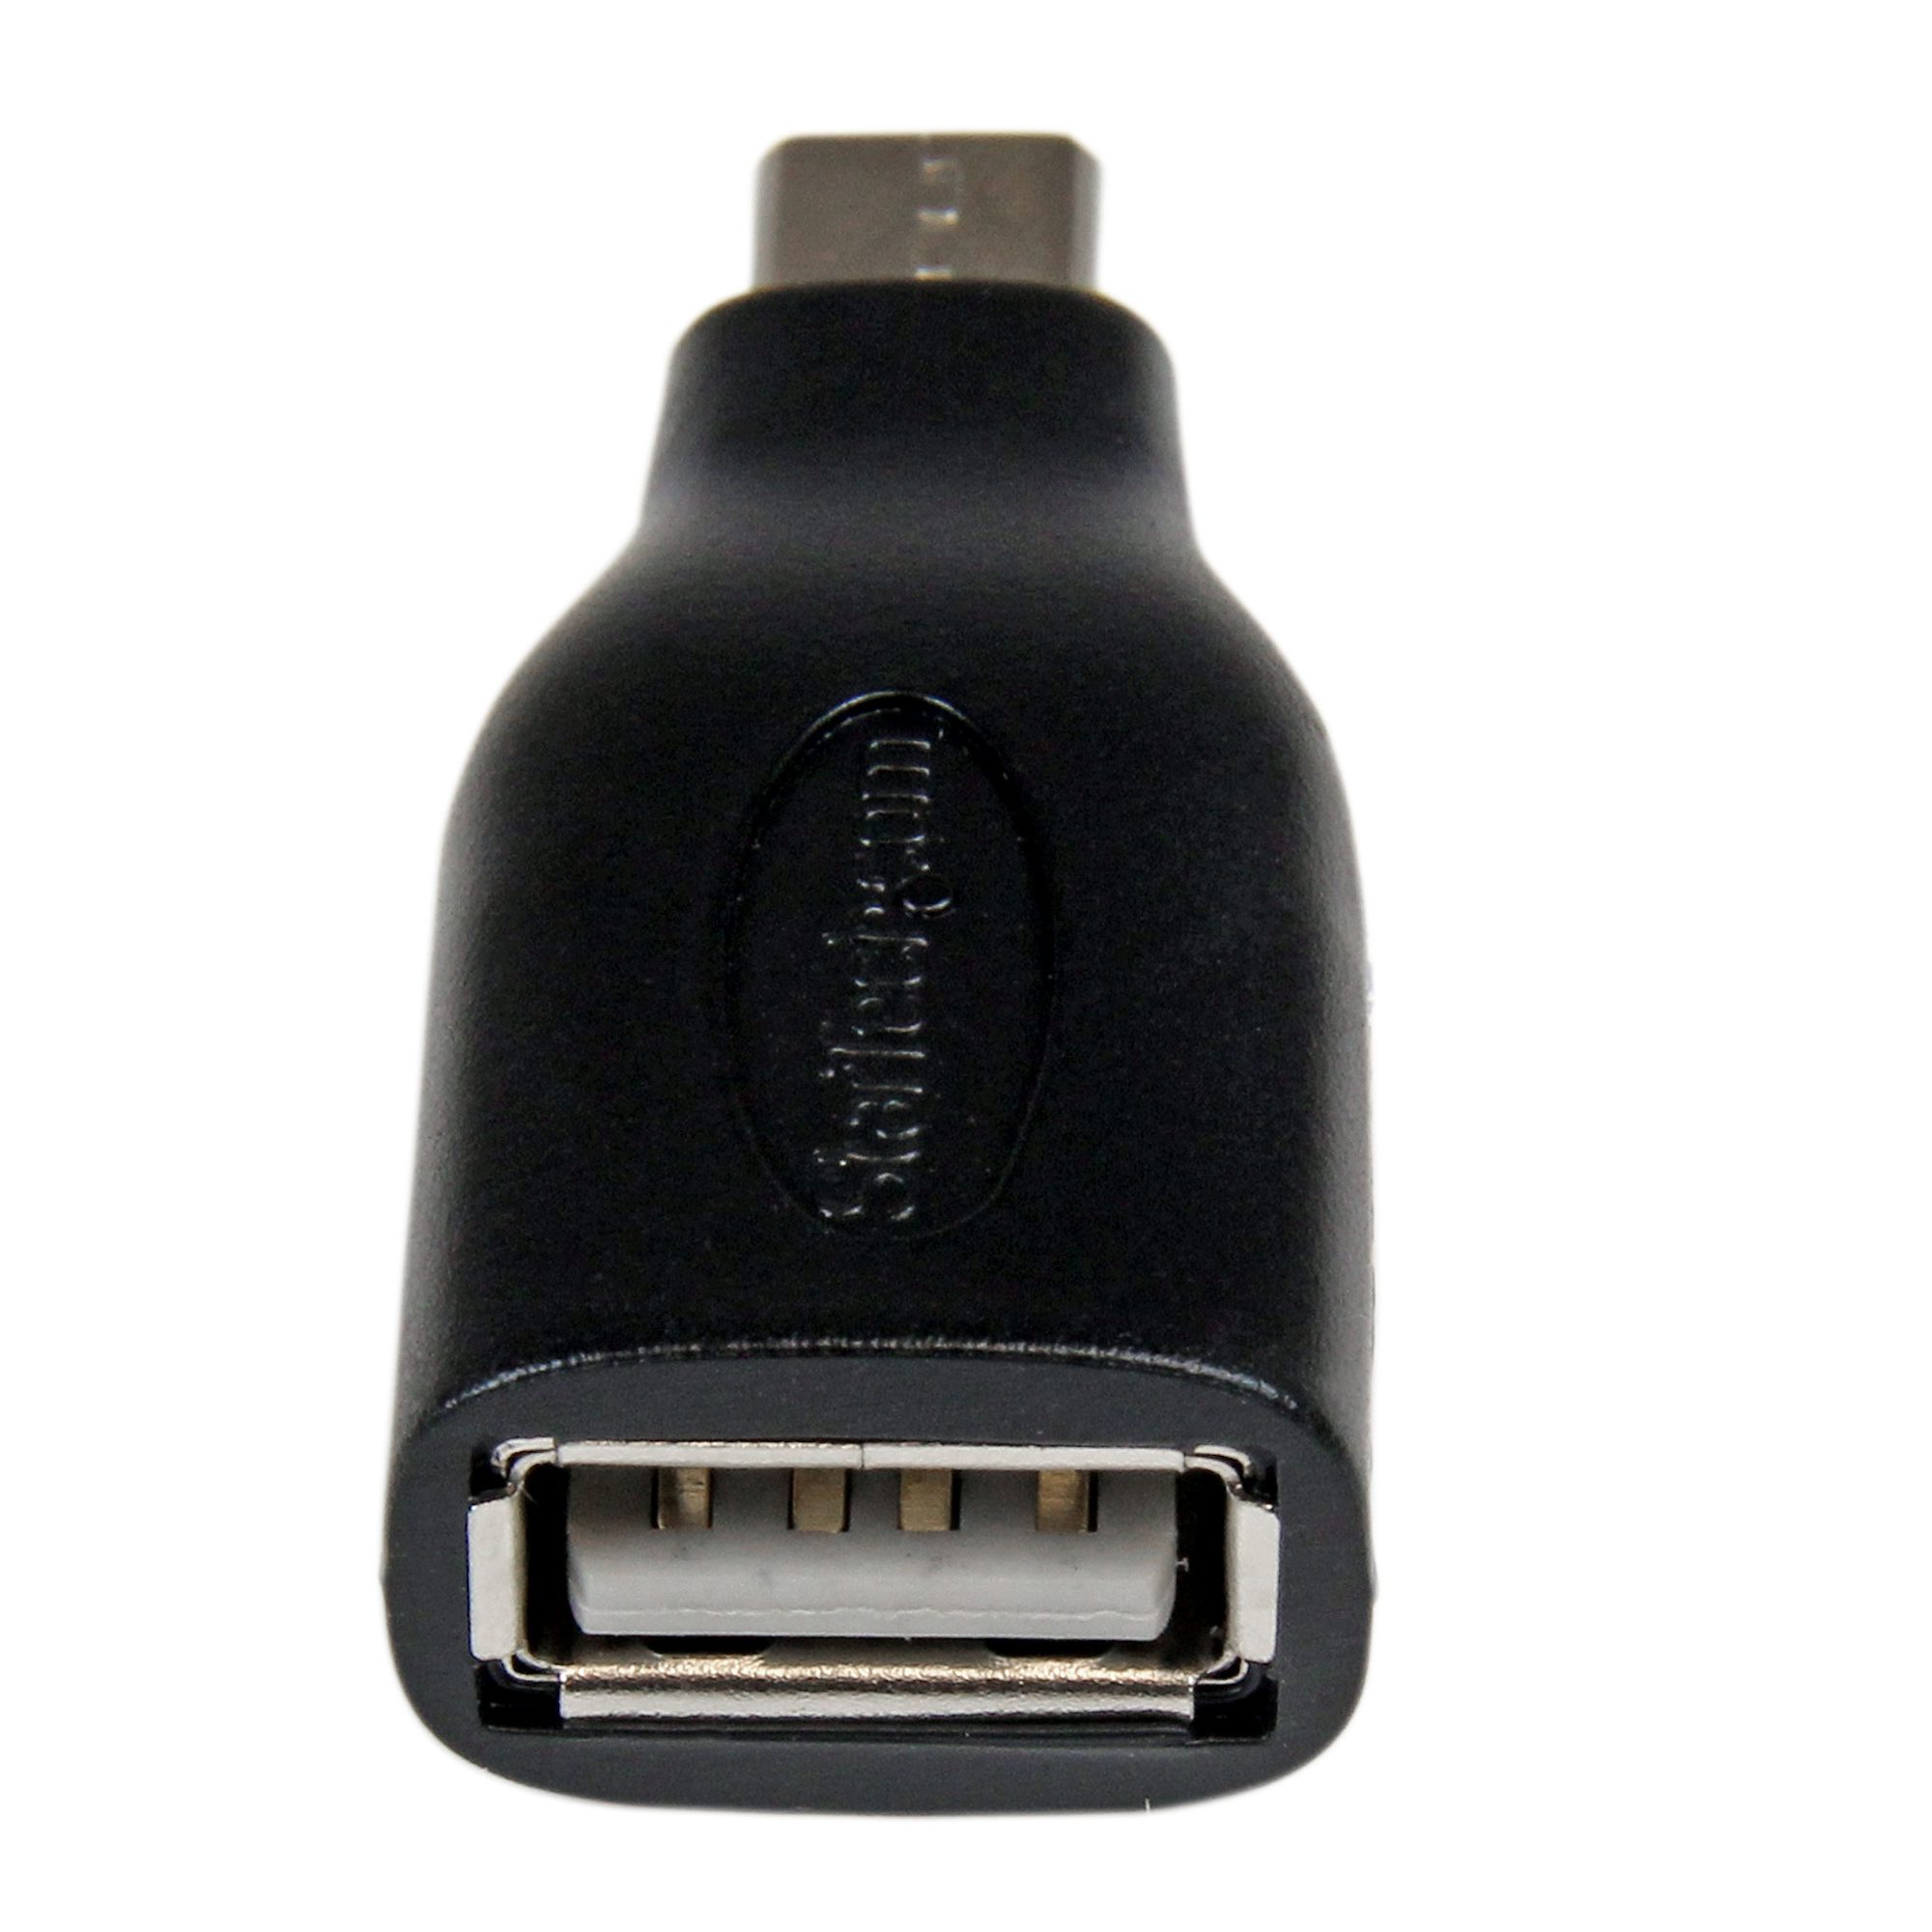 USB OTG AF + Micro BF to Micro BM cable, 0.15 m (A-OTG-AFBM-04)